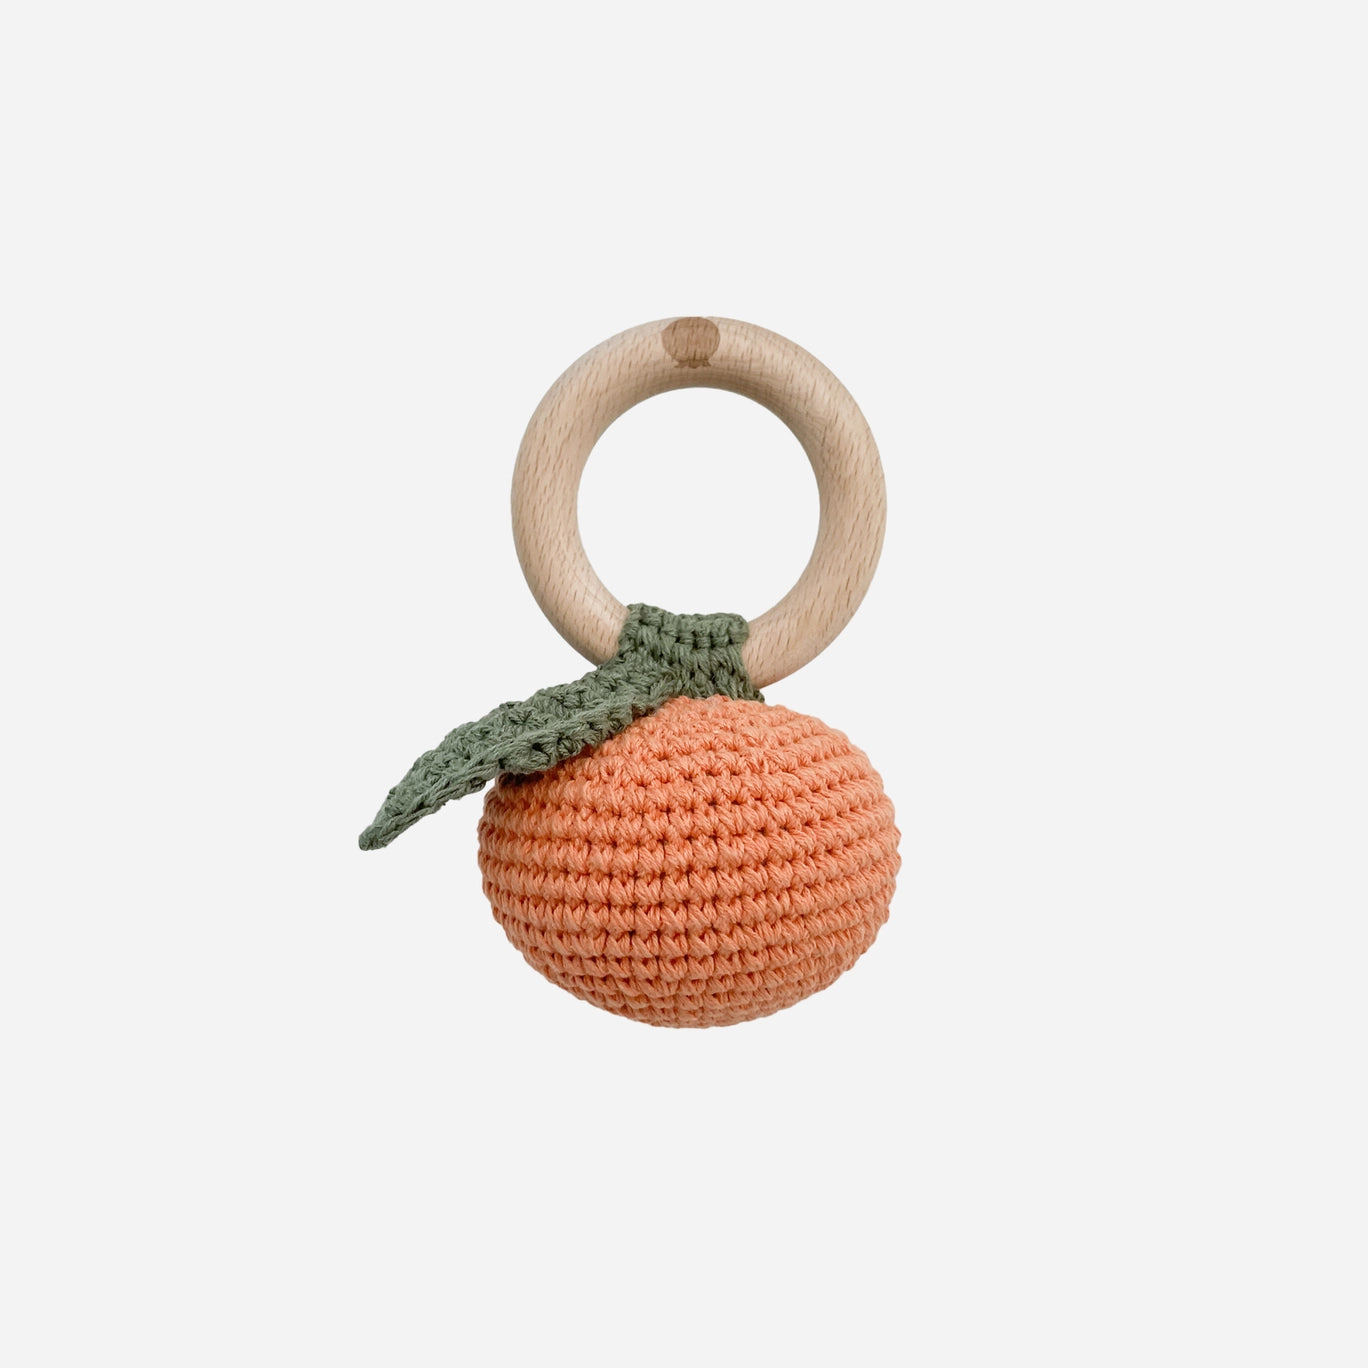 The Blueberry Hill crochet rattle teether